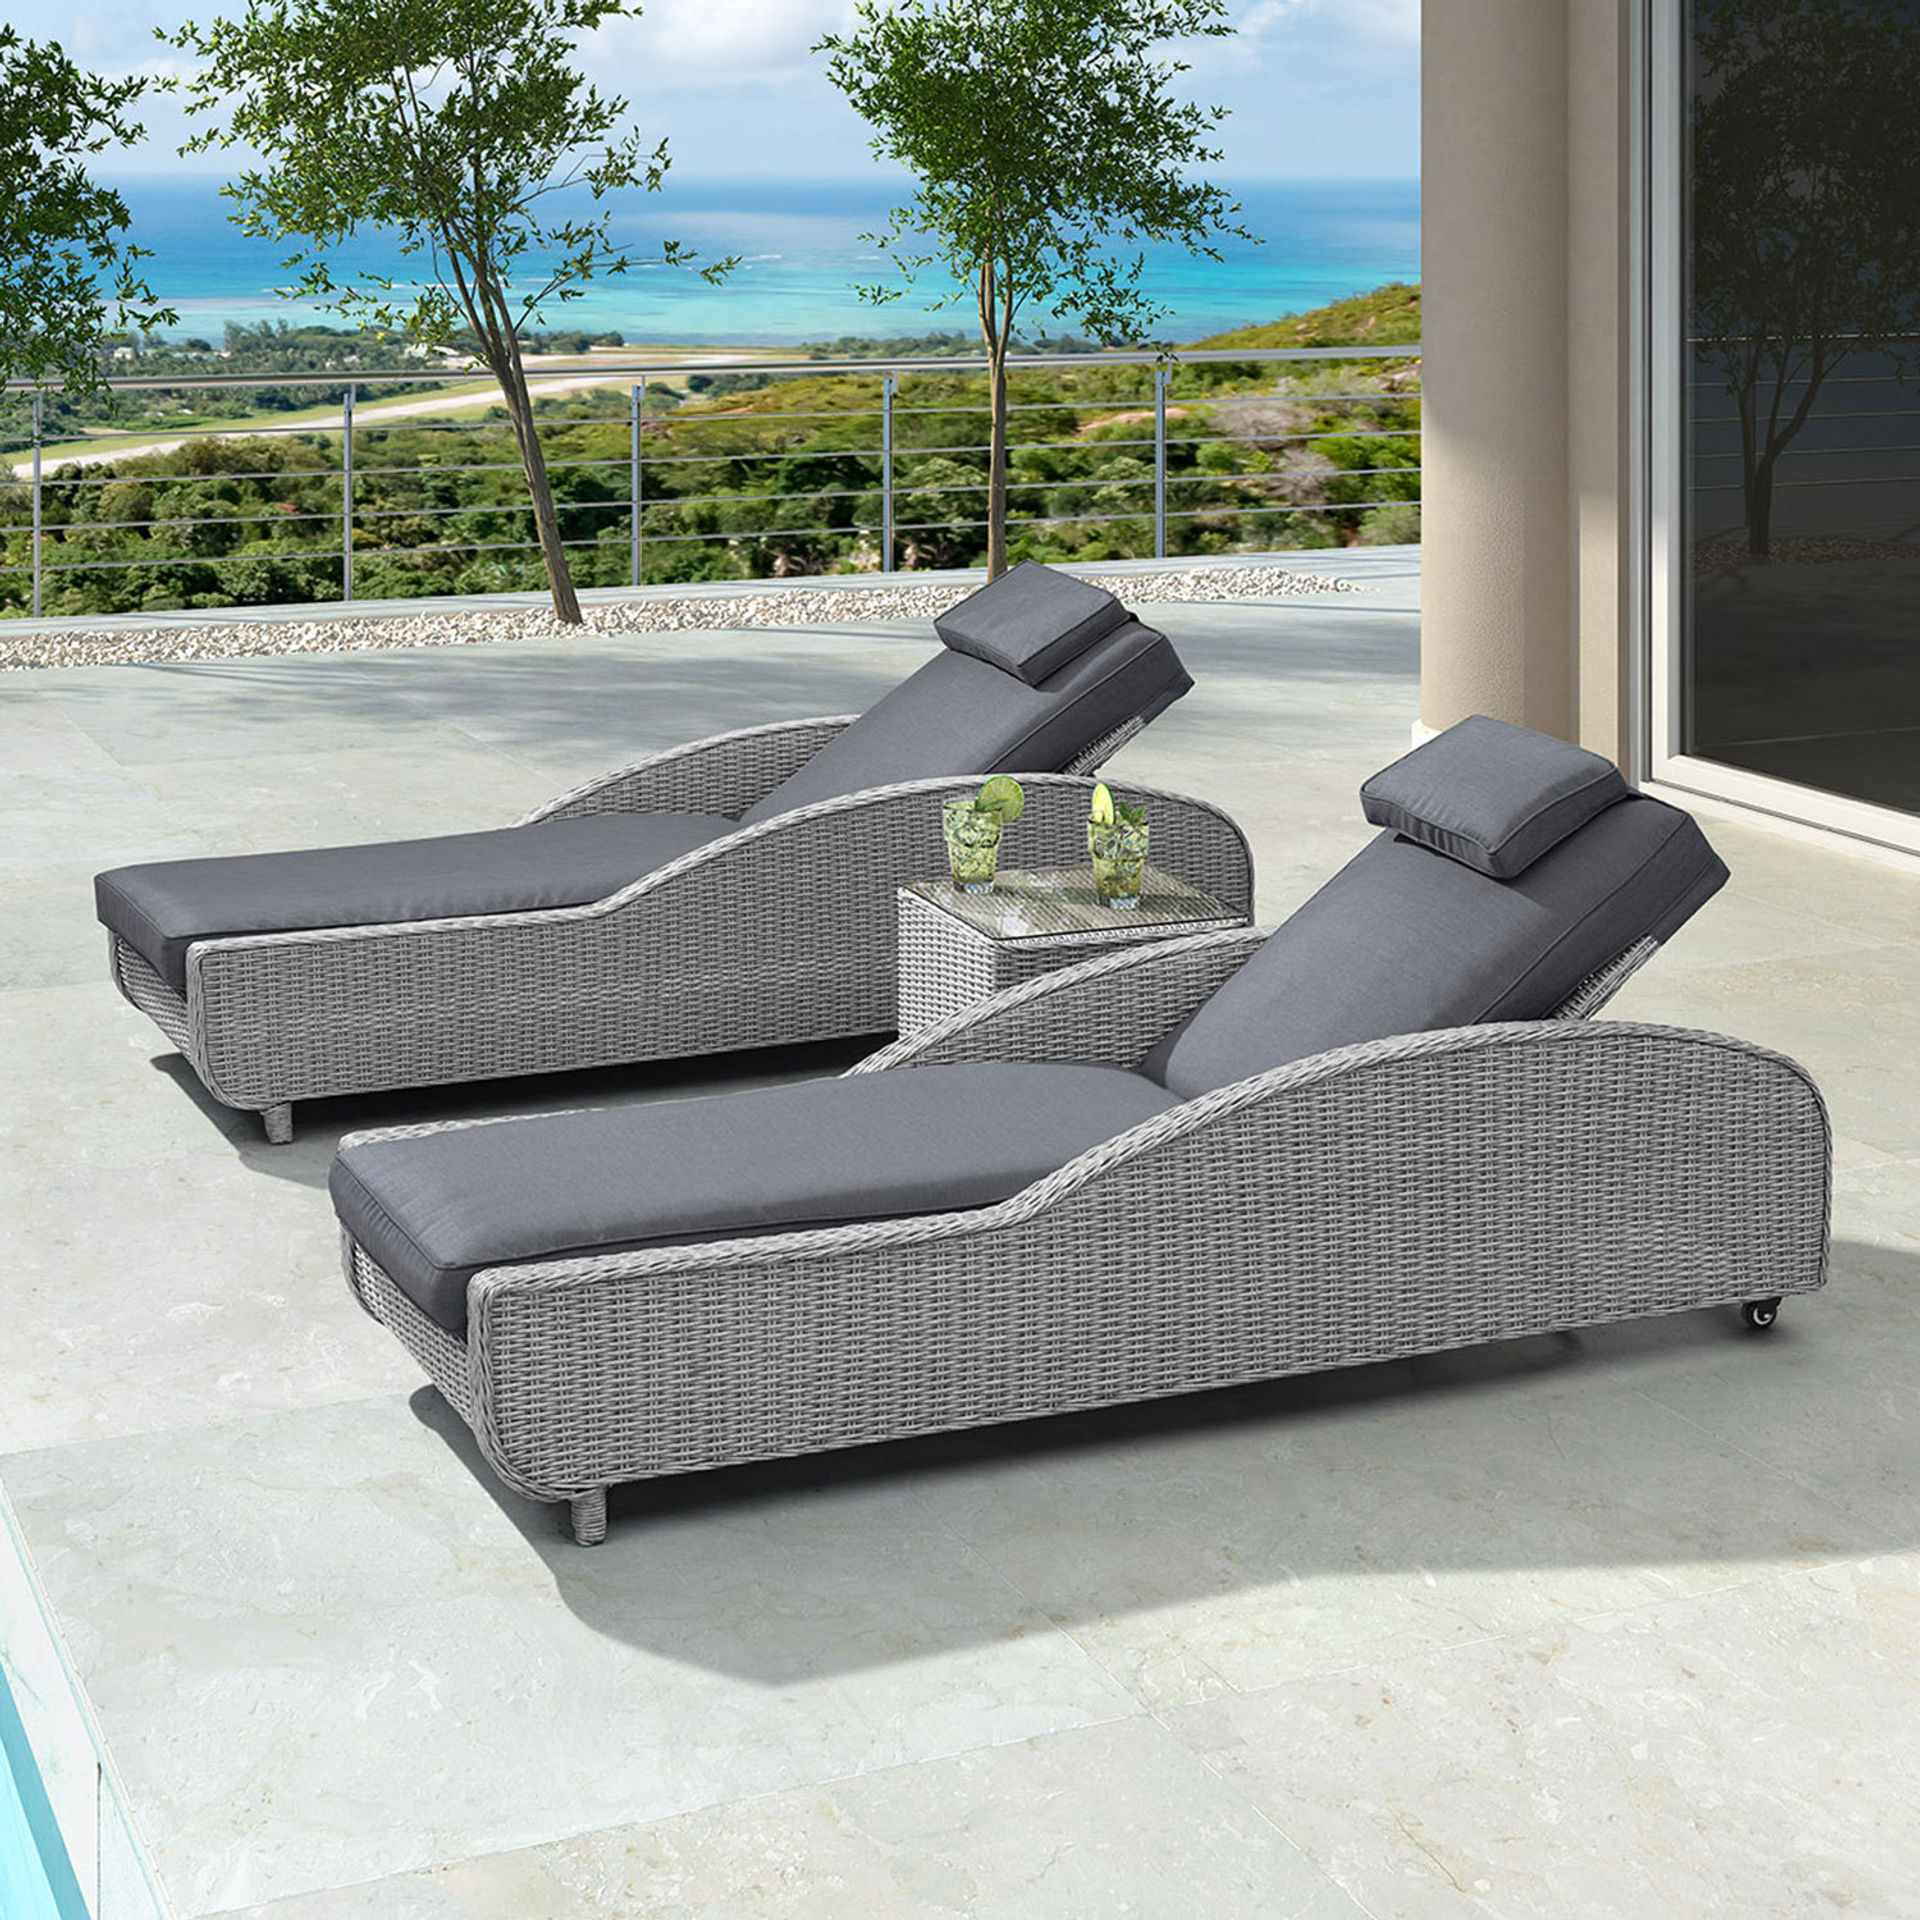 Maddison Sunlounger Set with Table